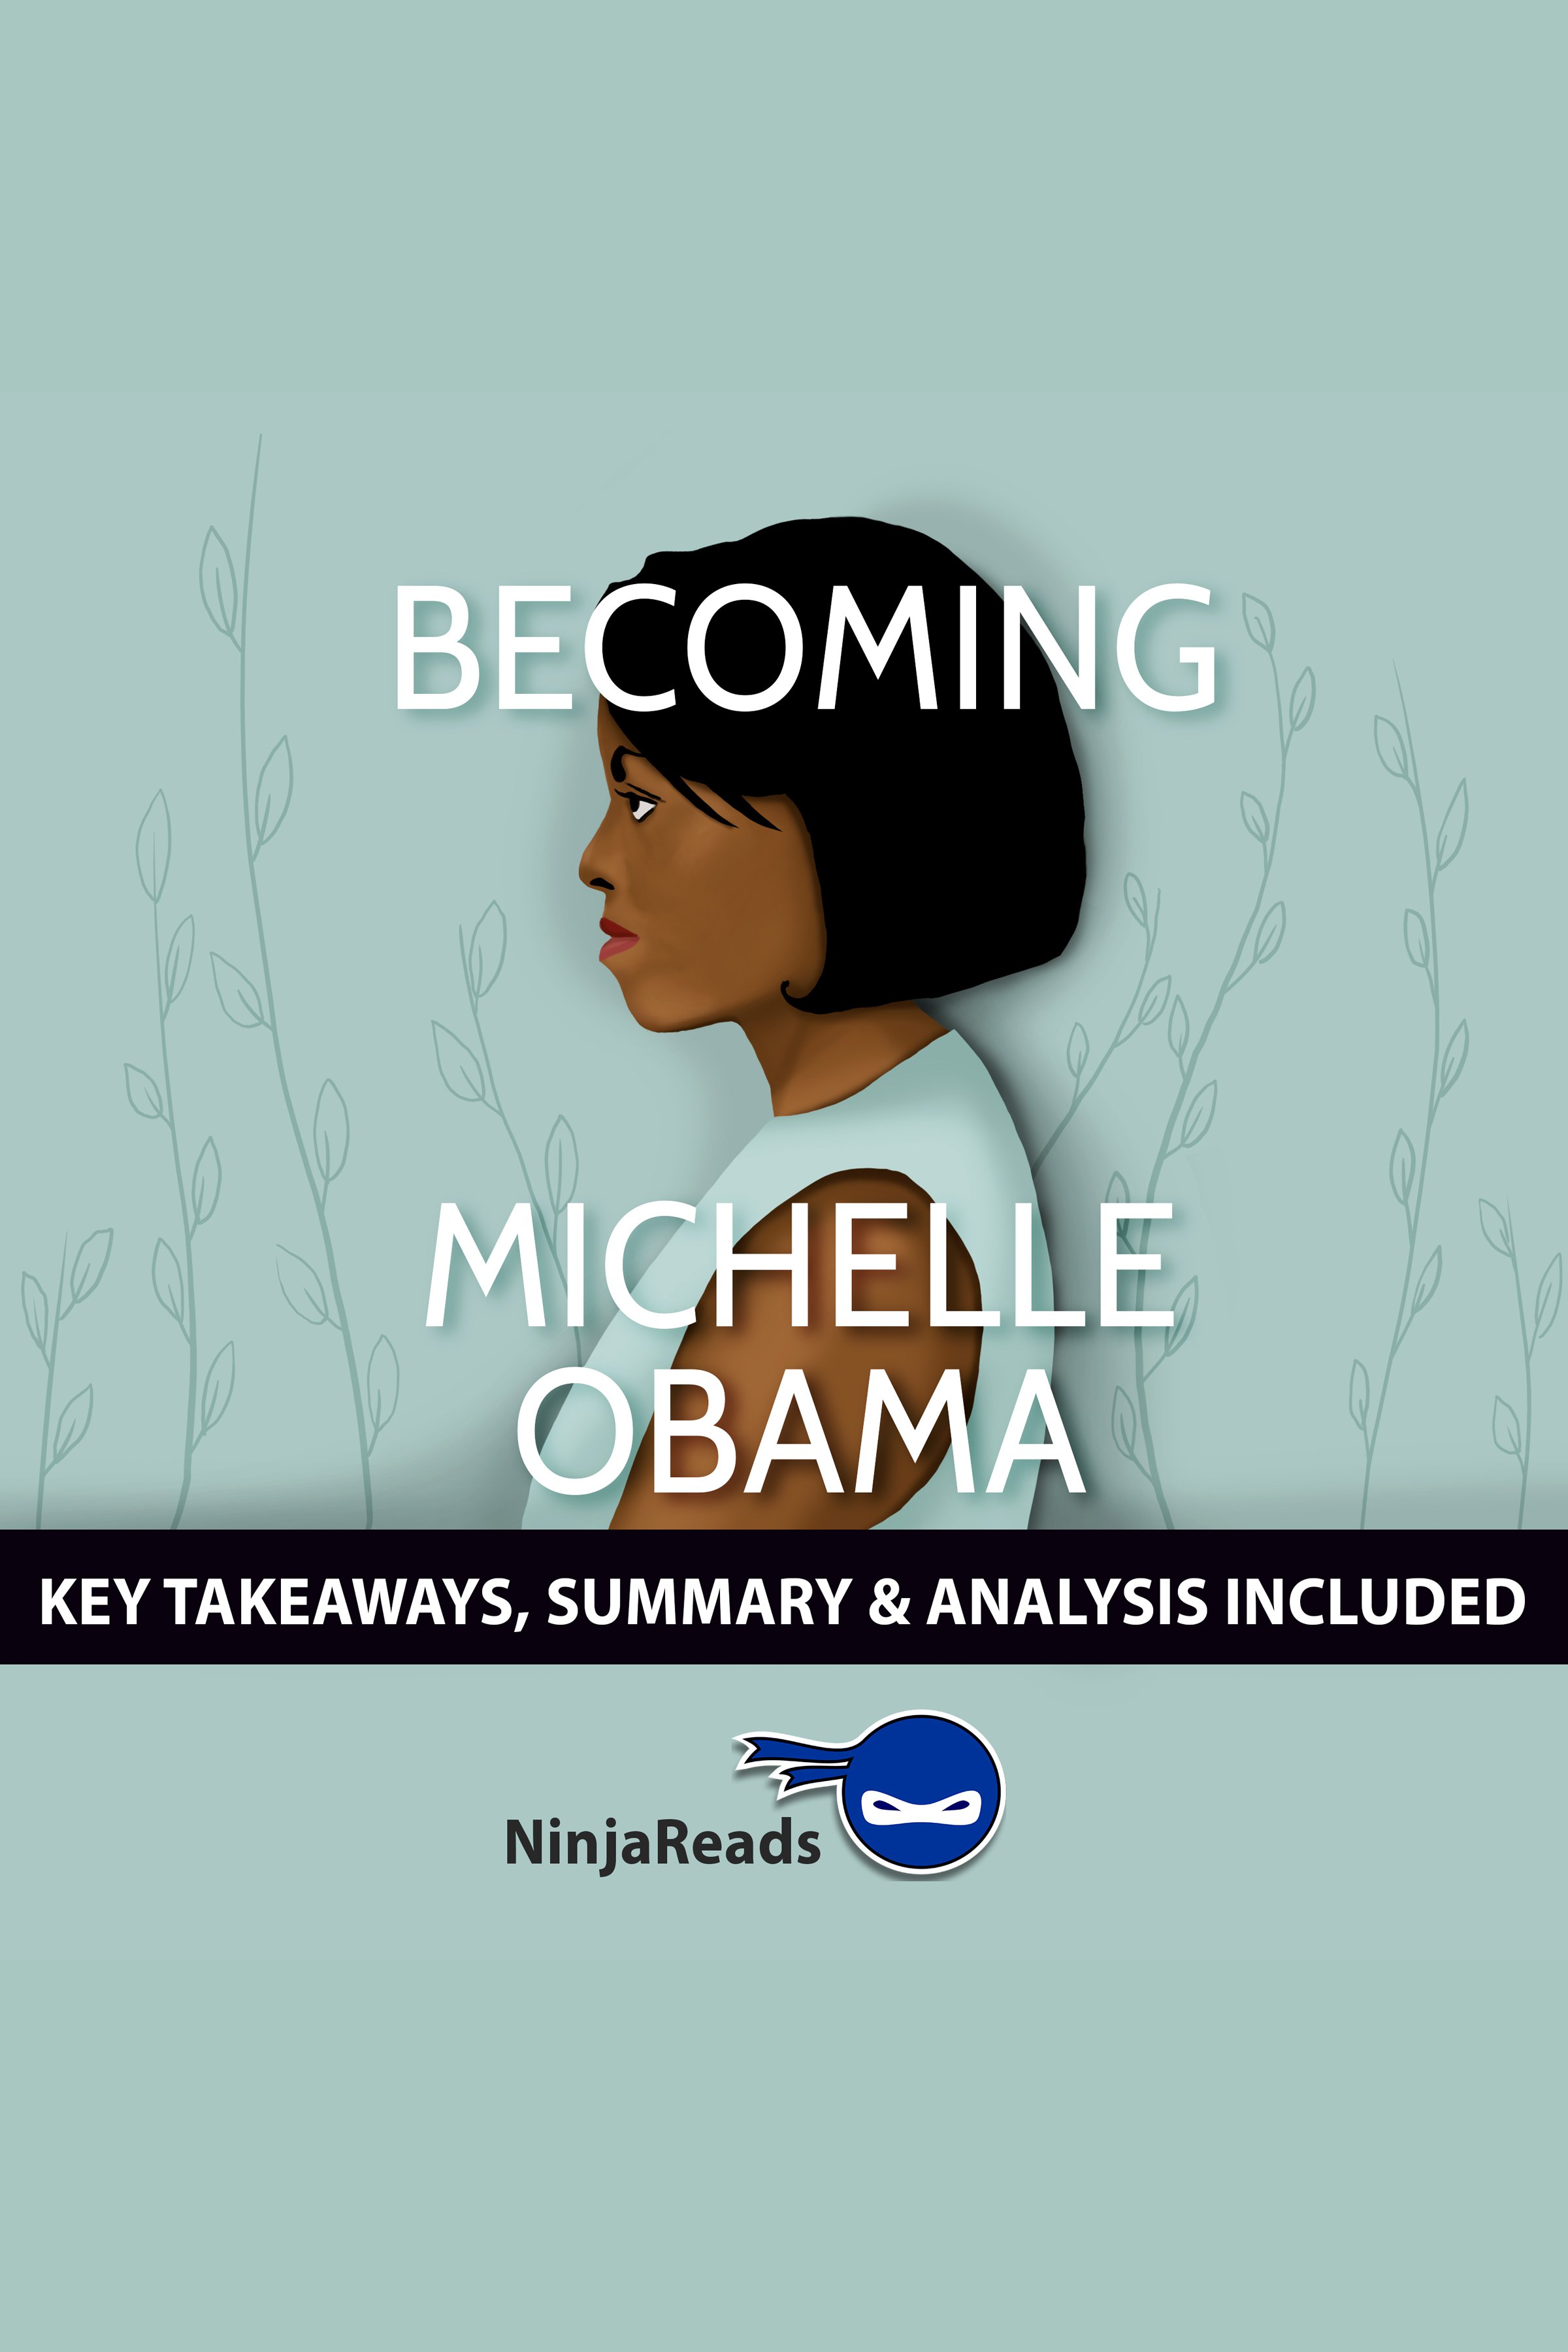 Becoming by Michelle Obama Key Takeaways, Summary & Analysis Included cover image